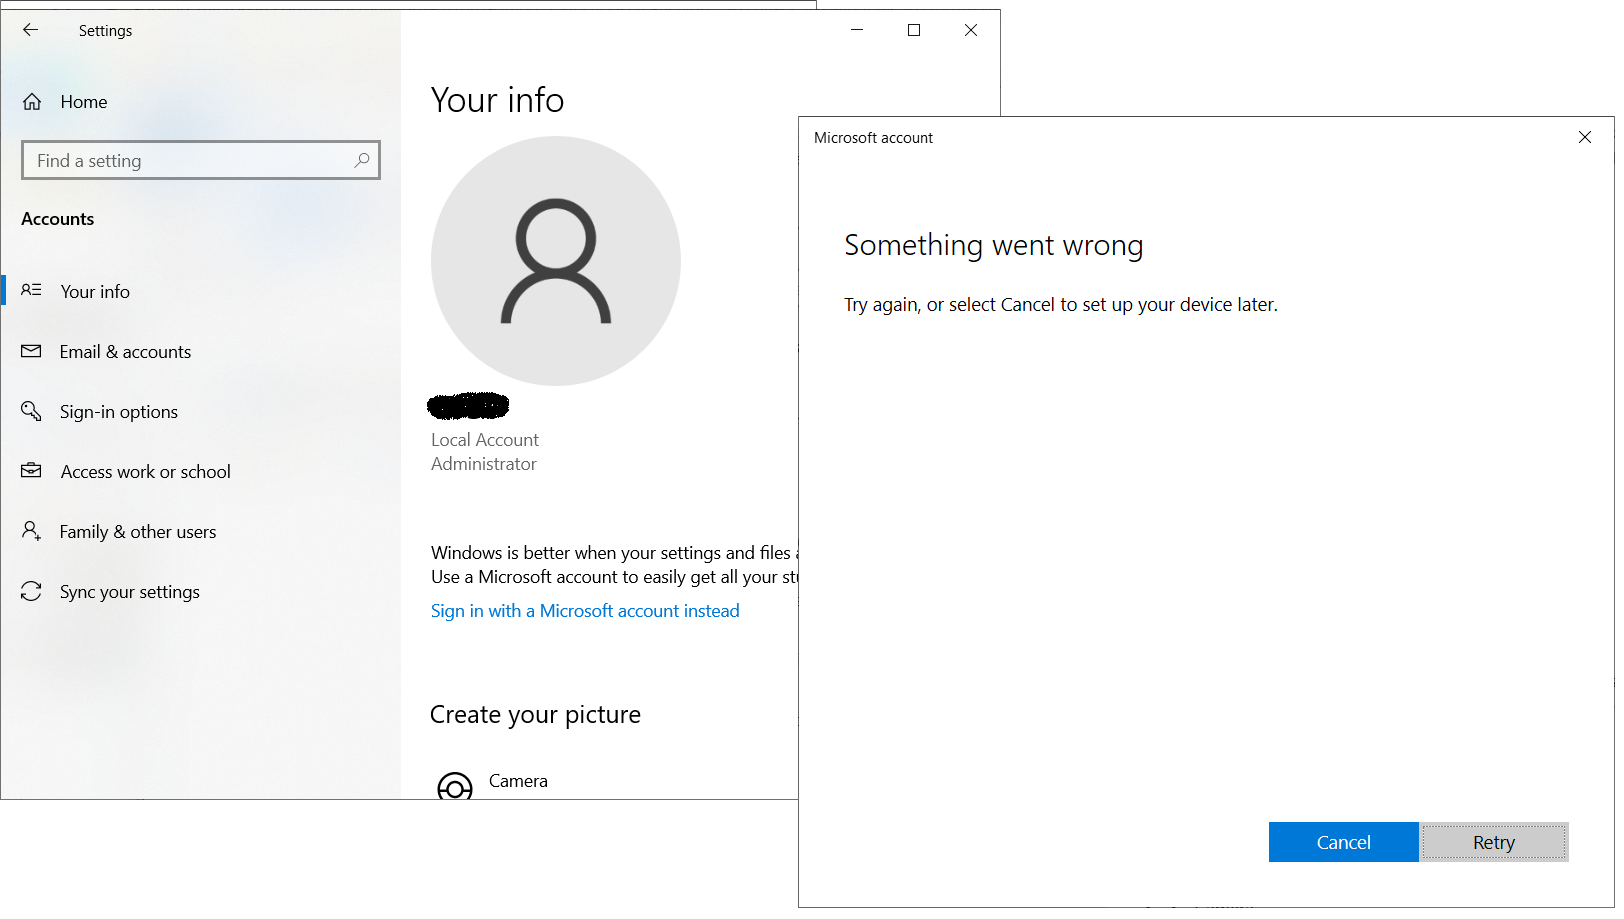 Cannot access "Sign in with a Microsoft account instead" eac15a7c-8020-4dd3-8419-06c340be4750?upload=true.png